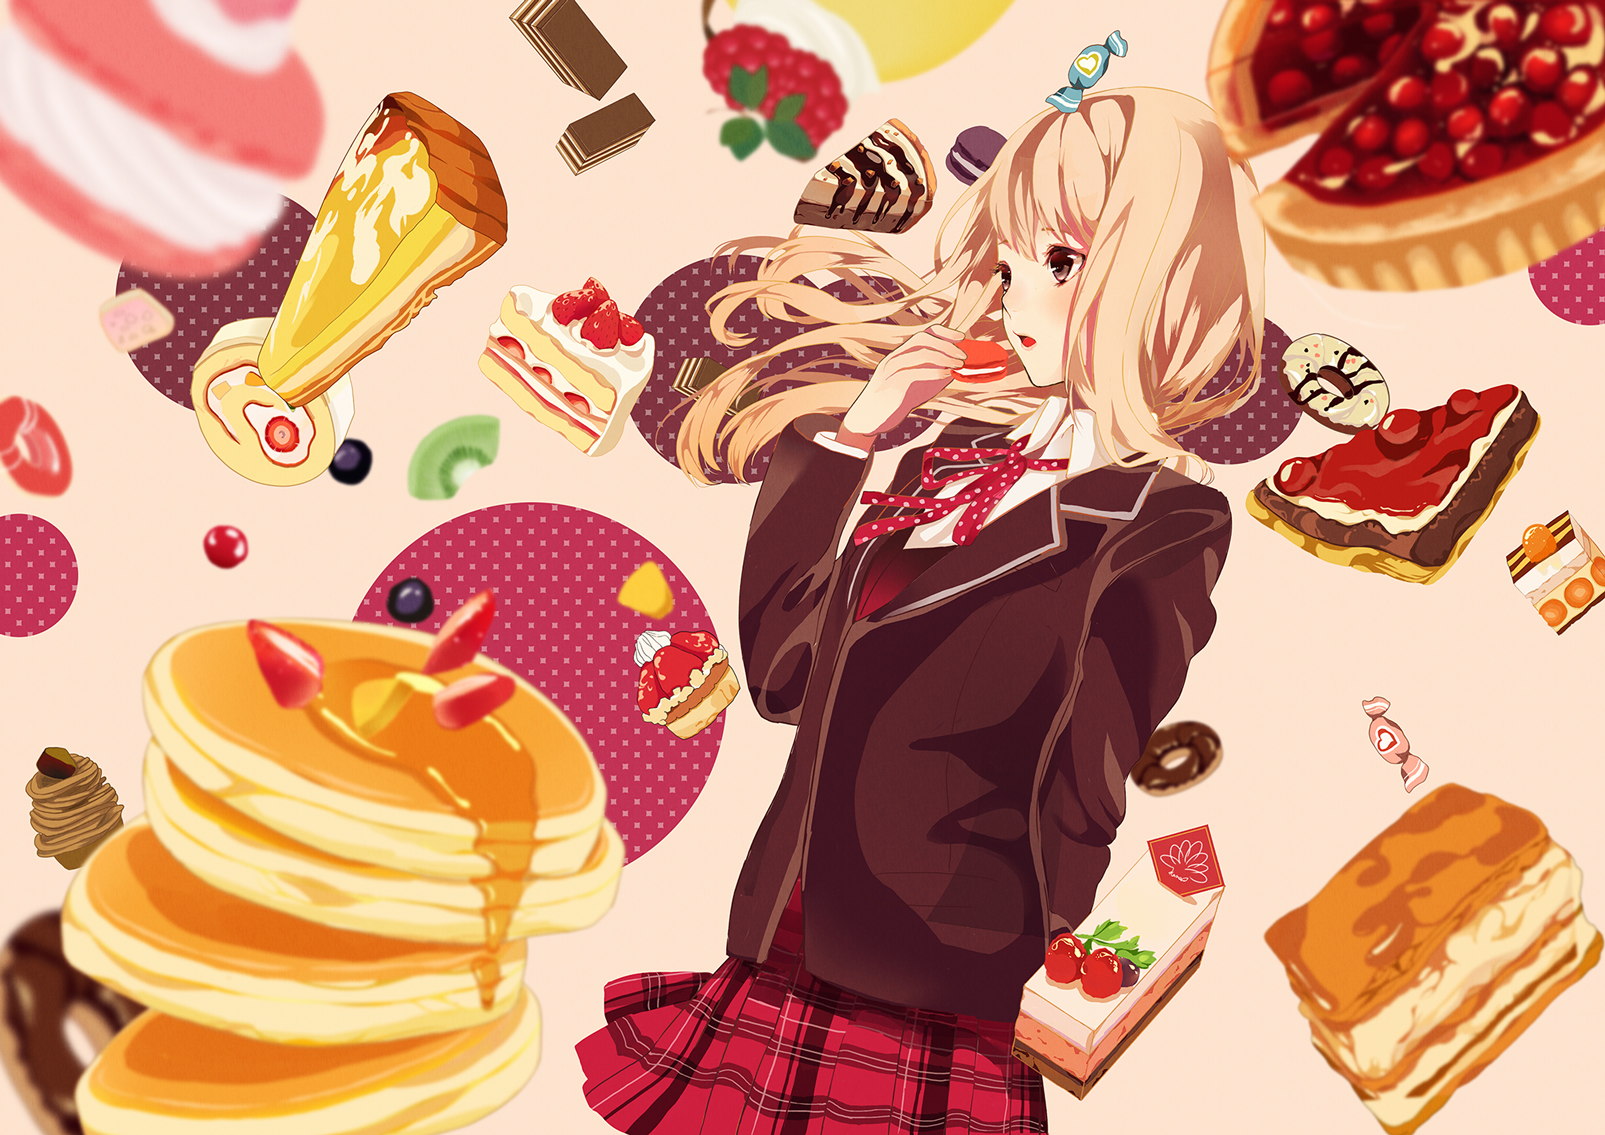 Anime Anime Girls Cake Pancakes Food Brown Eyes Pie Strawberries Candy Waffles Red Currant School Un 1605x1135